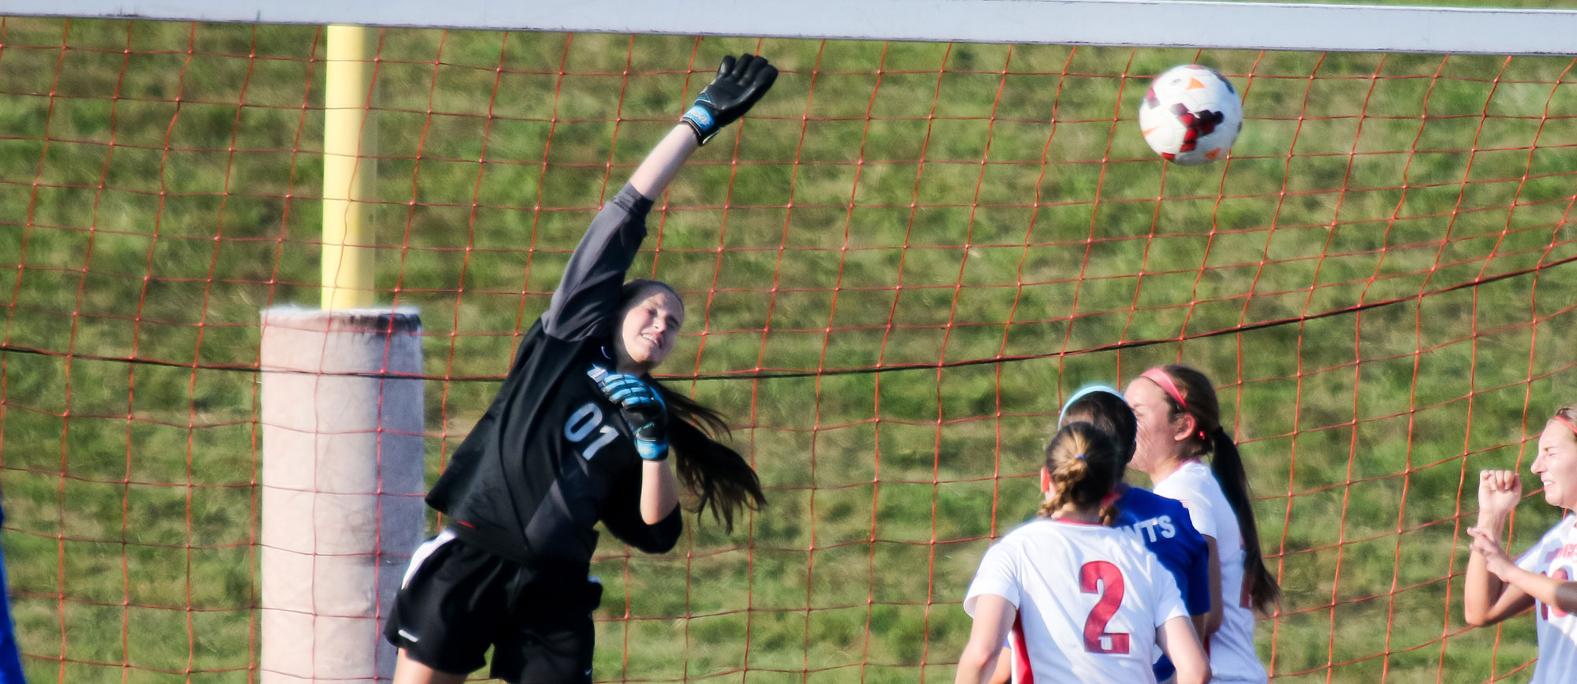 Alexa Murrietta teamed with Hannah Wilson to keep a clean sheet in an overtime win over Pitt-Bradford. File Photo | Erin Pence